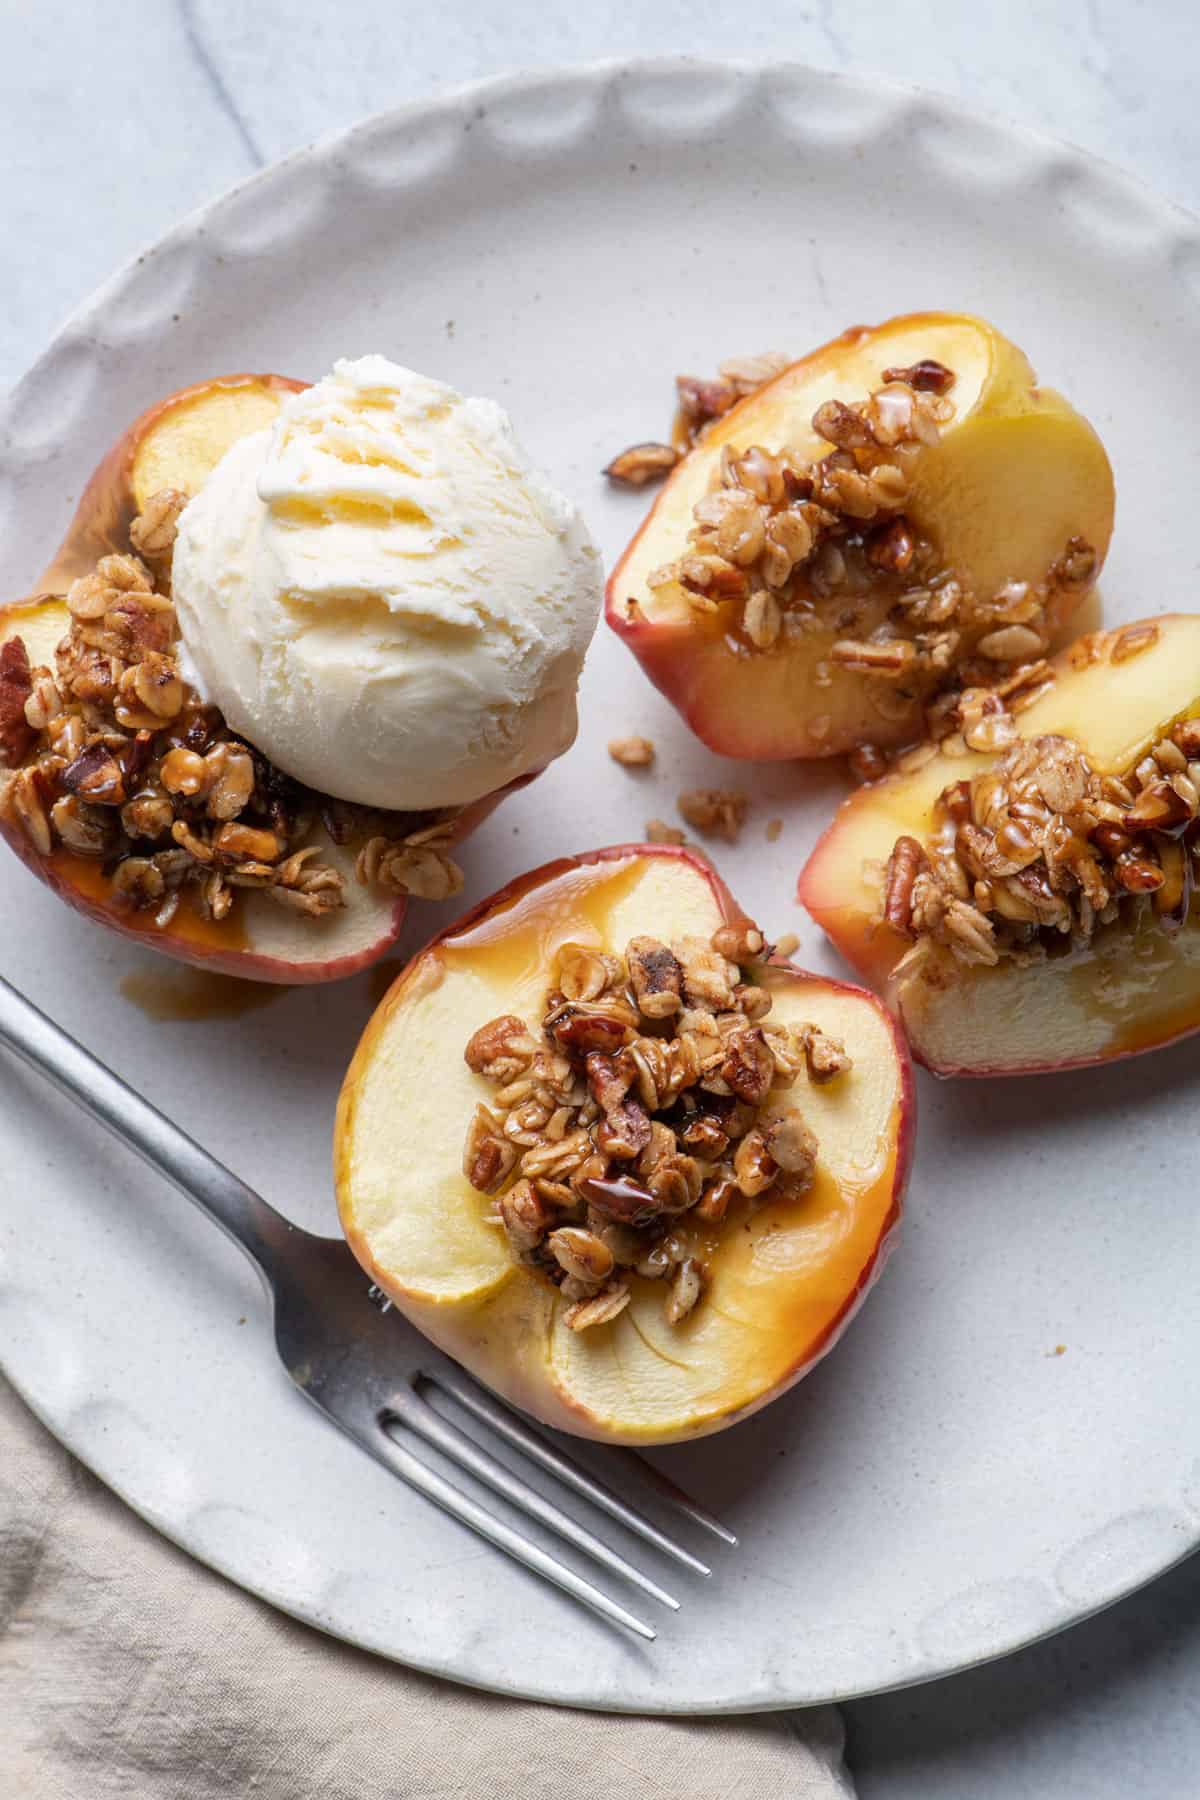 Cinnamon Baked Apples with Oats & Pecans in a blue bowl with ice cream